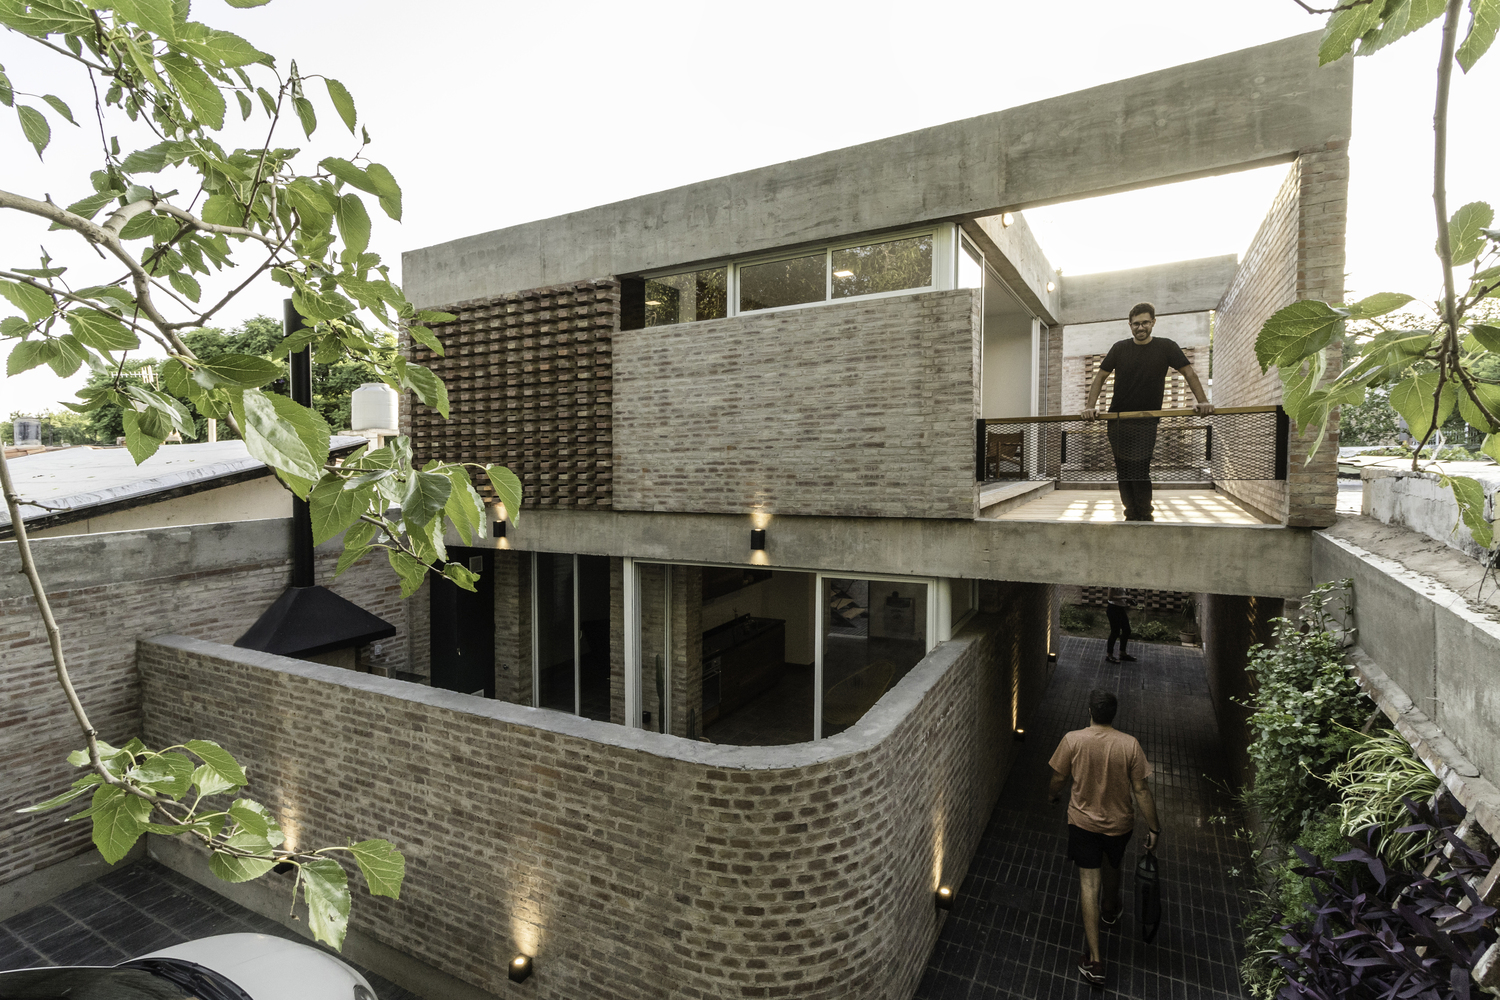 Man standing on terrace of brick clad building.